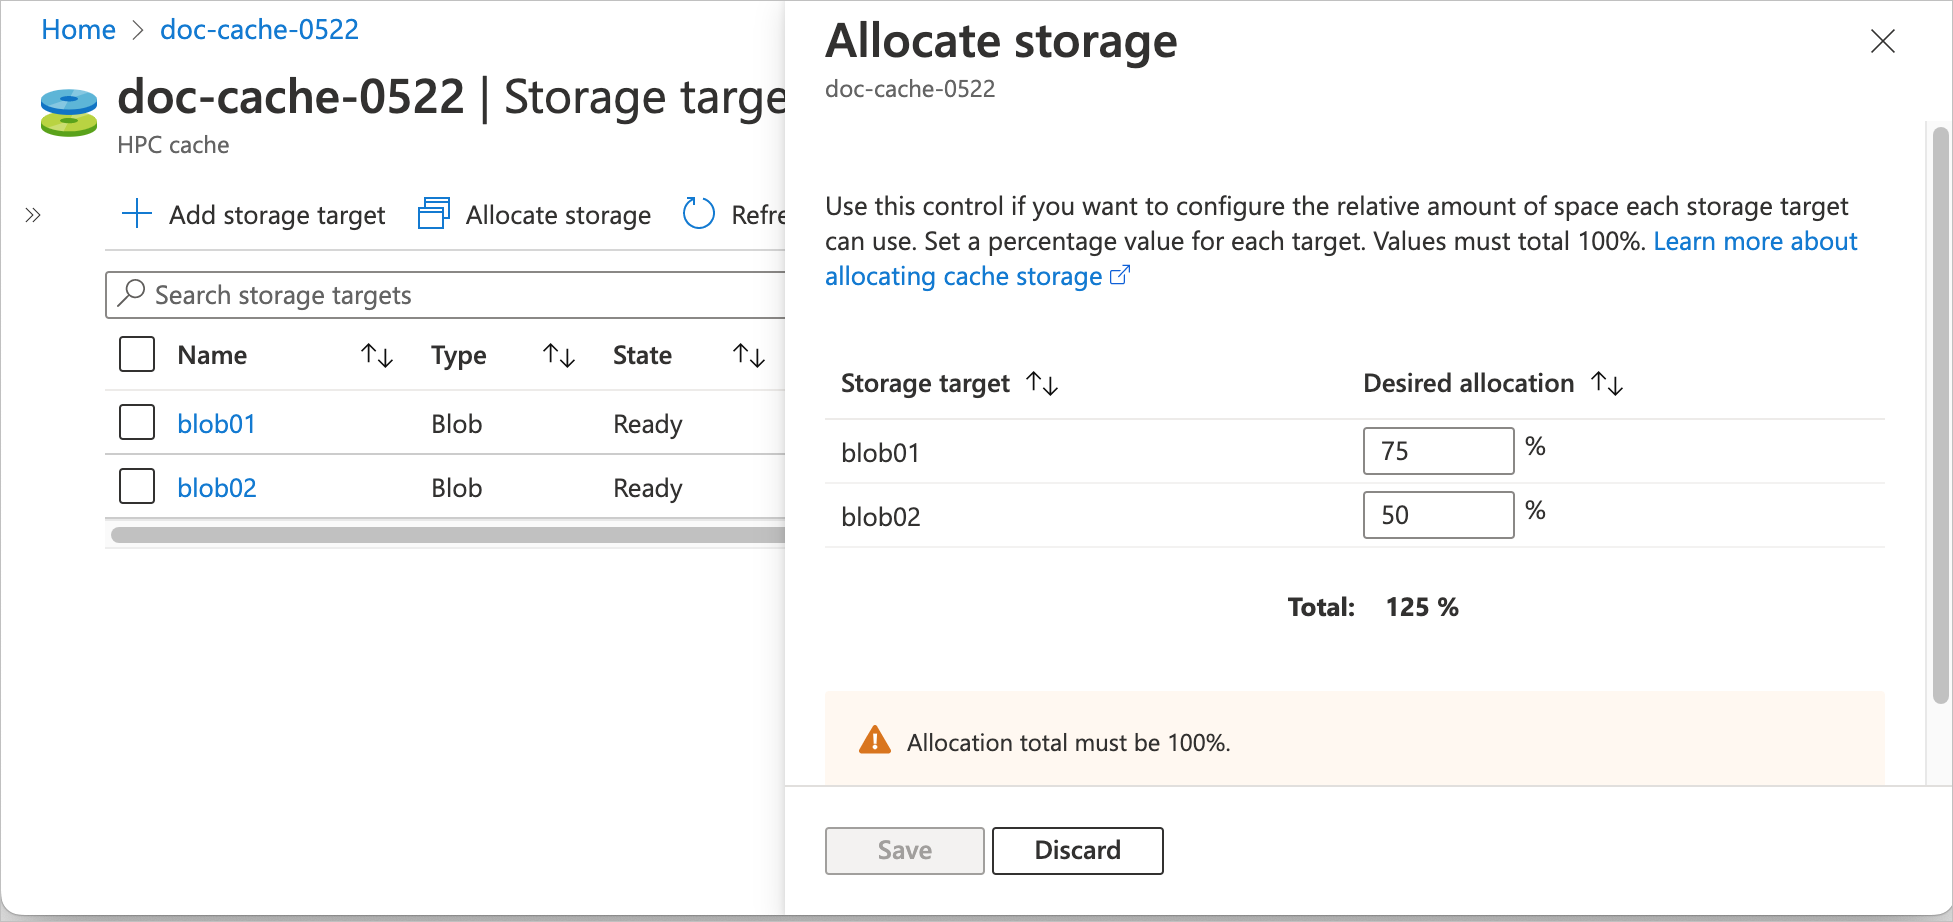 Screenshot of the 'Allocate storage' panel at the right side of the storage targets list. Text fields next to each storage target name allow you to enter a new percent value for each target. The screenshot has target 'blob01' set to 75% and target 'blob02' set to 50%. The total is calculated underneath as 125% and an error message explains that the total must be 100%. The Save button is inactive; the Discard button is active.